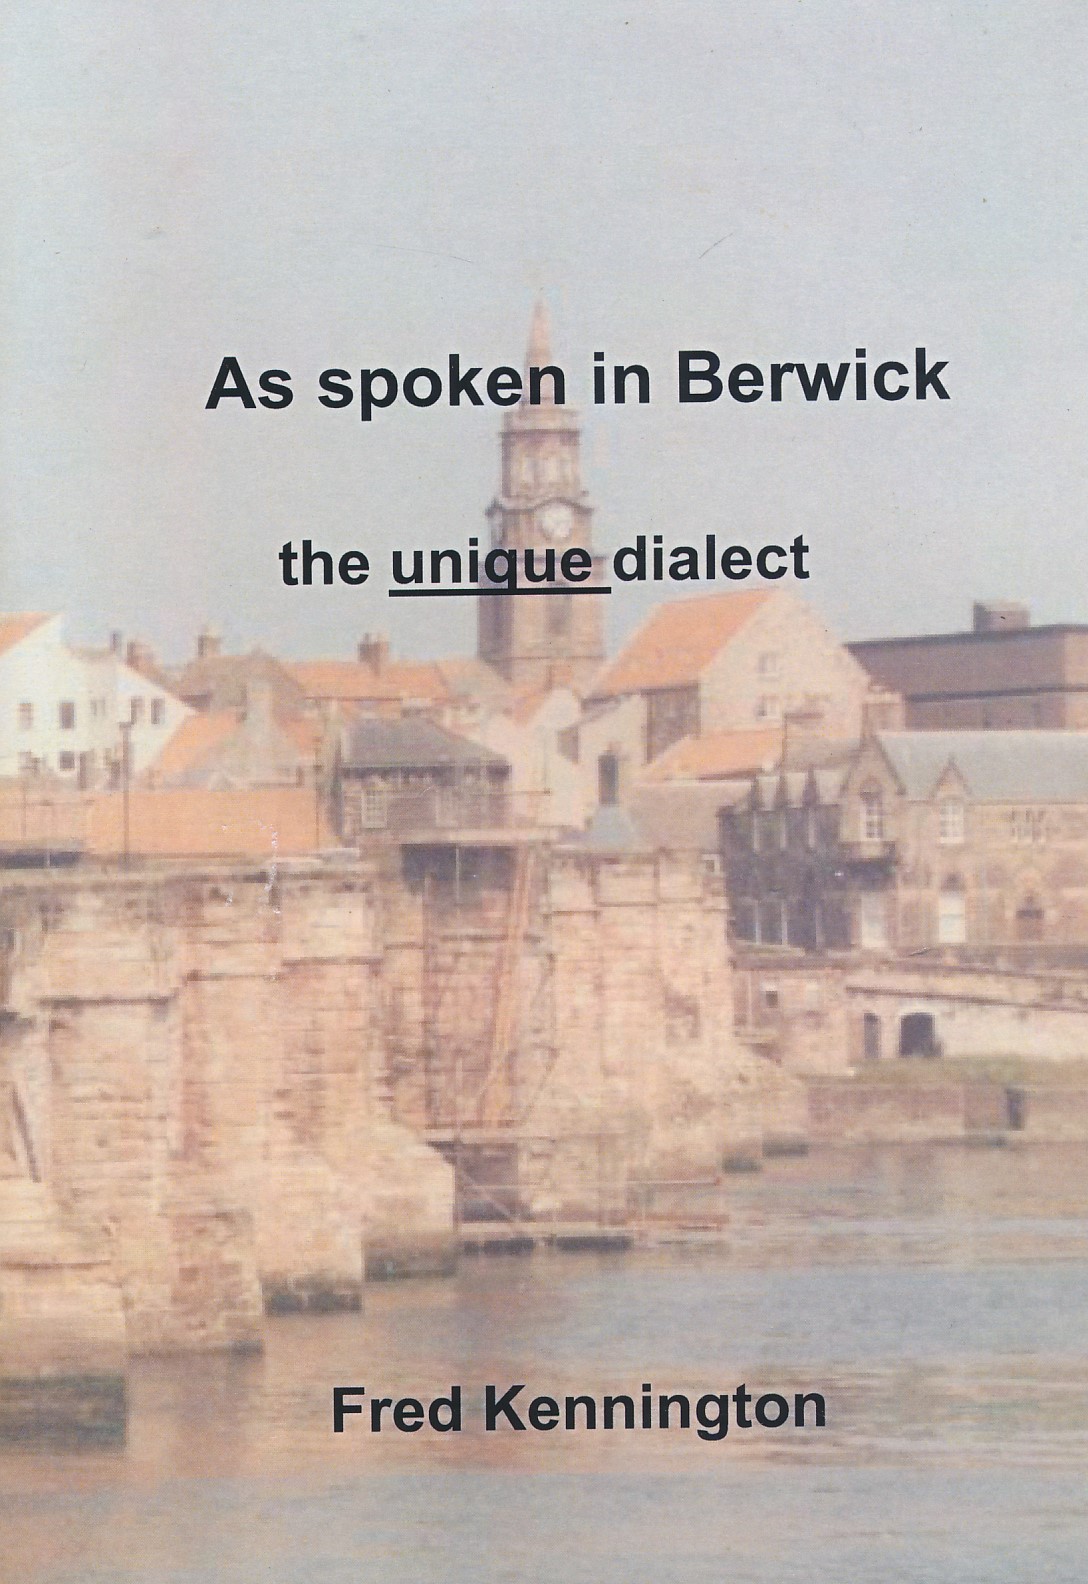 As Spoken in Berwick. The Unique Dialect. A Dialect Dictionary